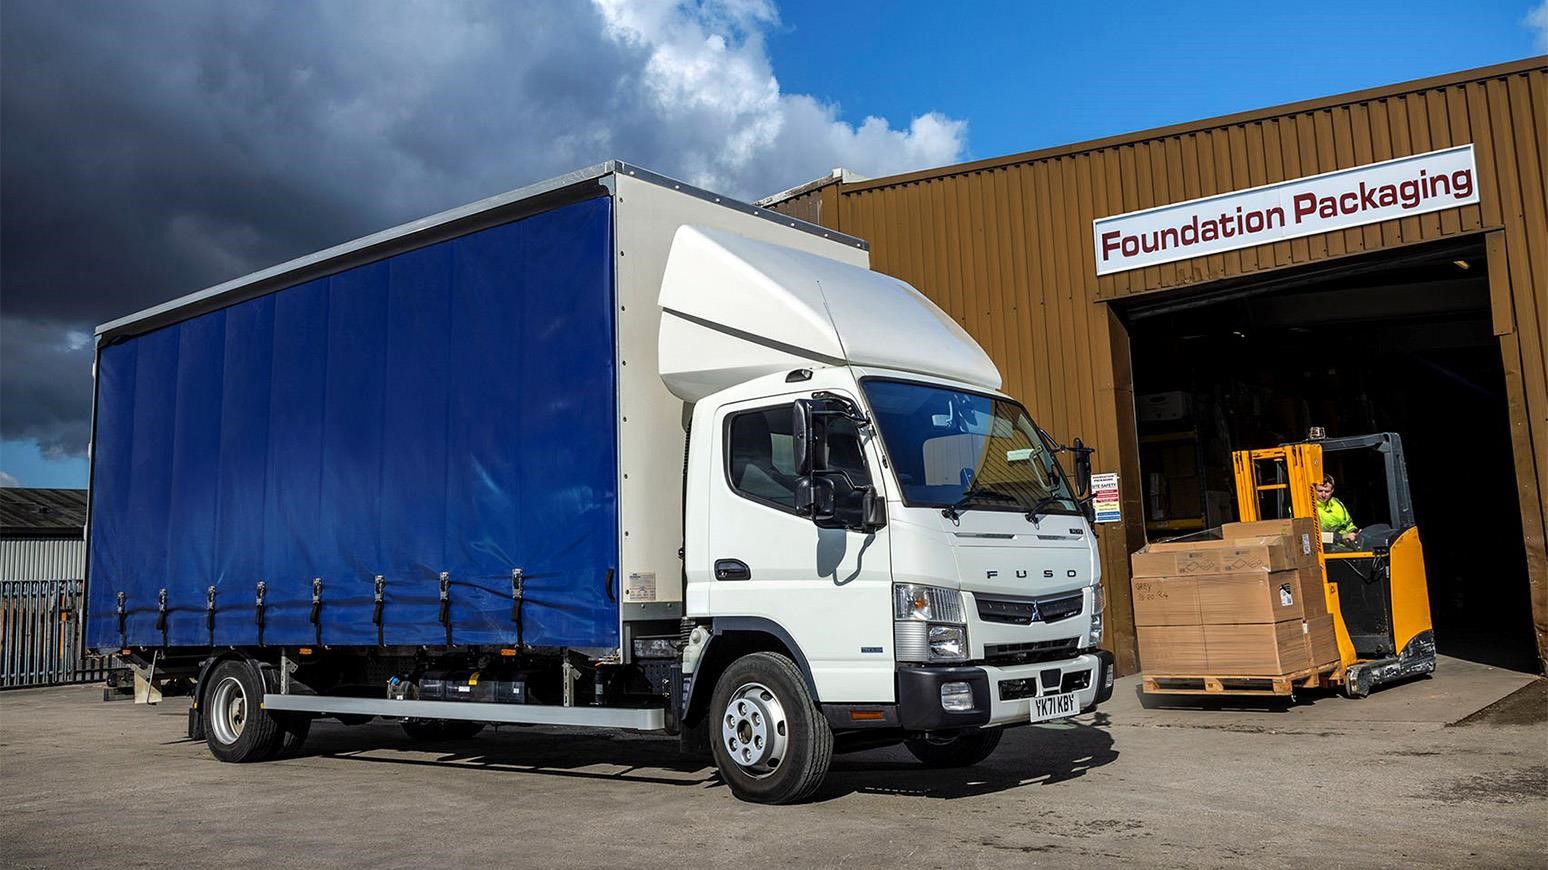 FUSO Canter Really Delivers For Yorkshire’s Foundation Packaging